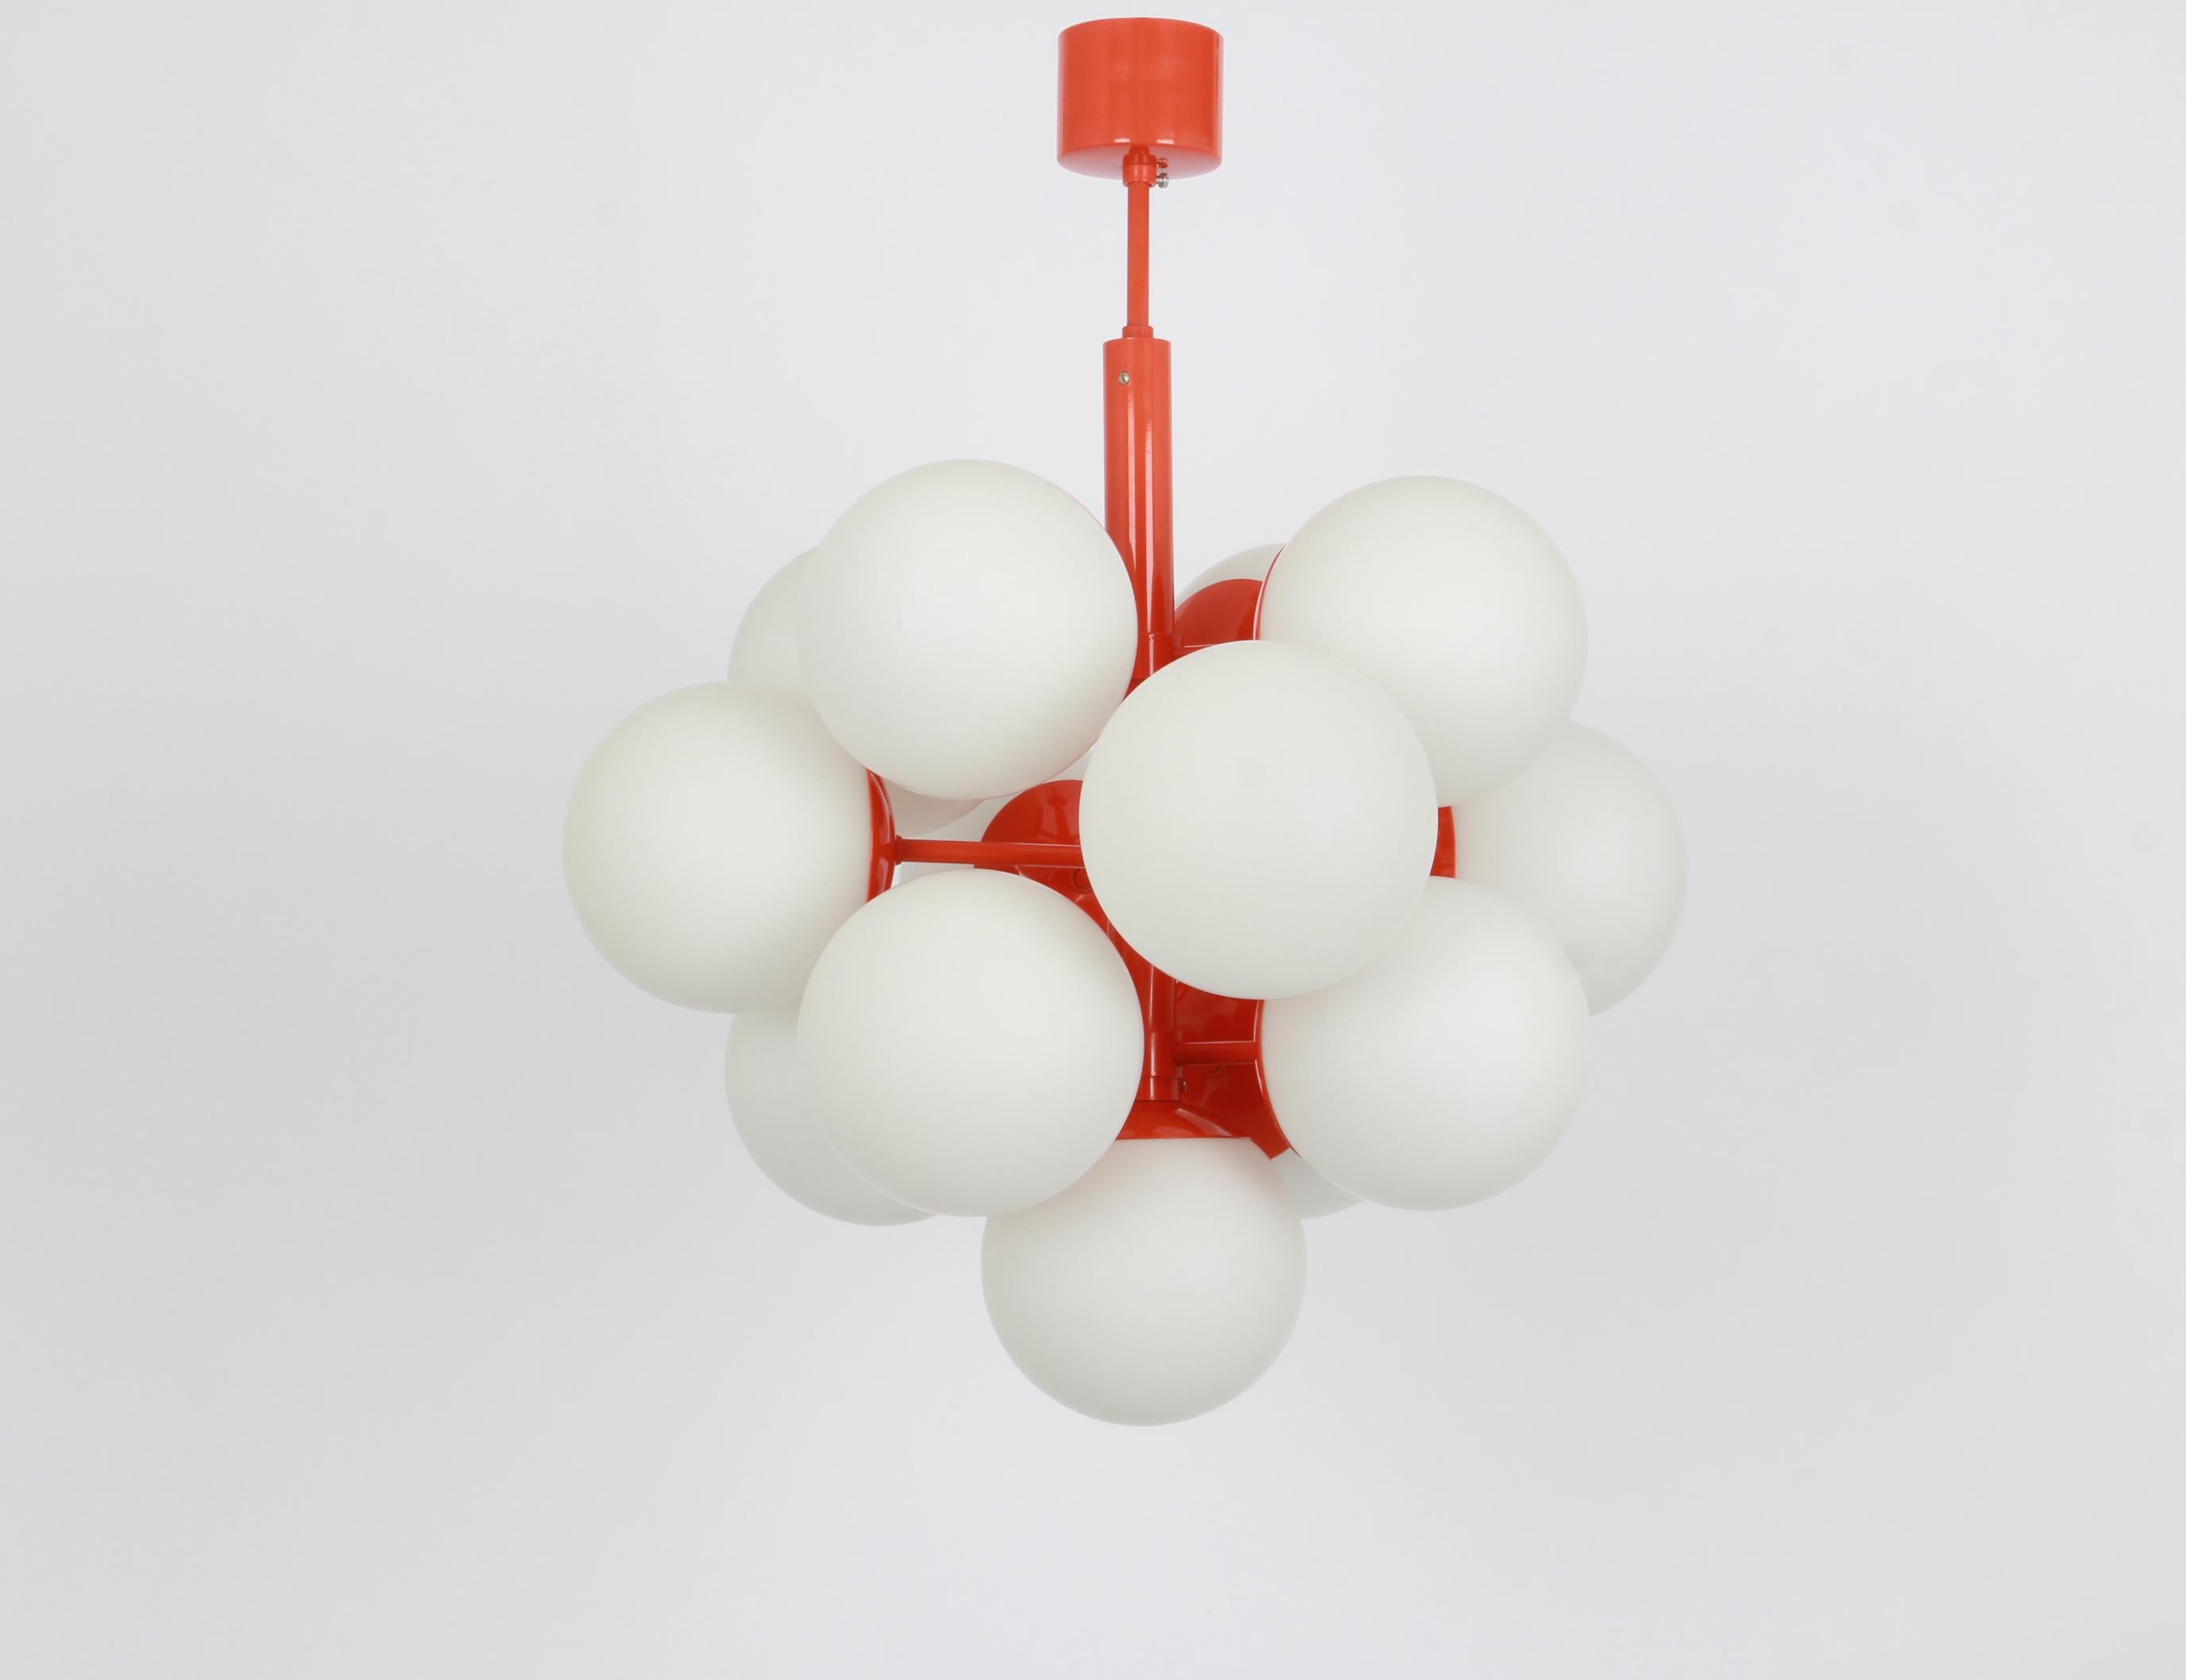 Stunning Orange color Sputnik chandelier with 13 handmade glass globes by Kaiser Leuchten, Germany, 1960s.
High quality and in very good condition. Cleaned, well-wired, and ready to use. 

The fixture requires 13 x E14 small bulbs with 40W max